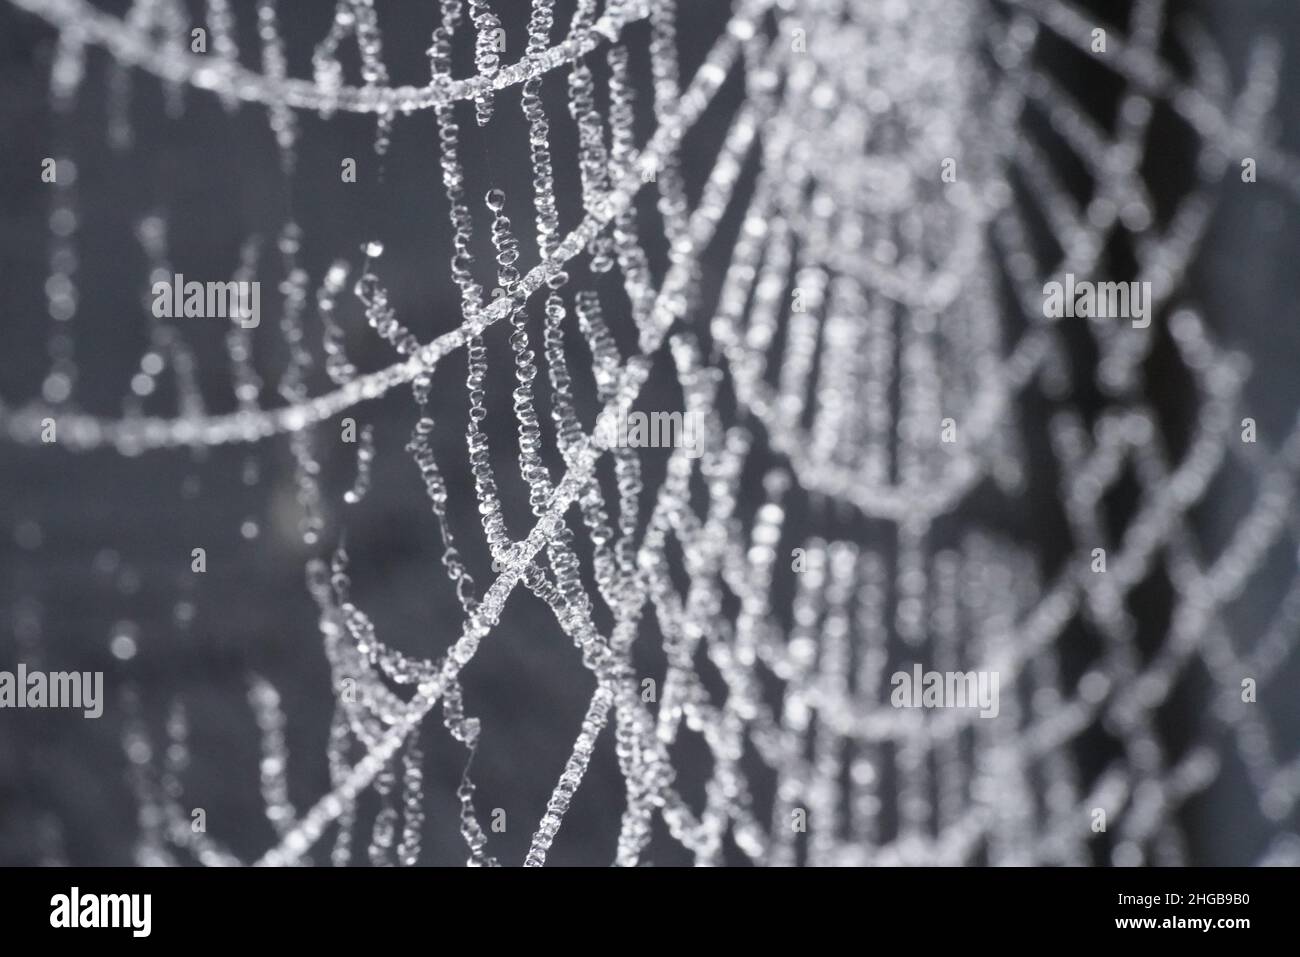 Spiders web with frost Stock Photo